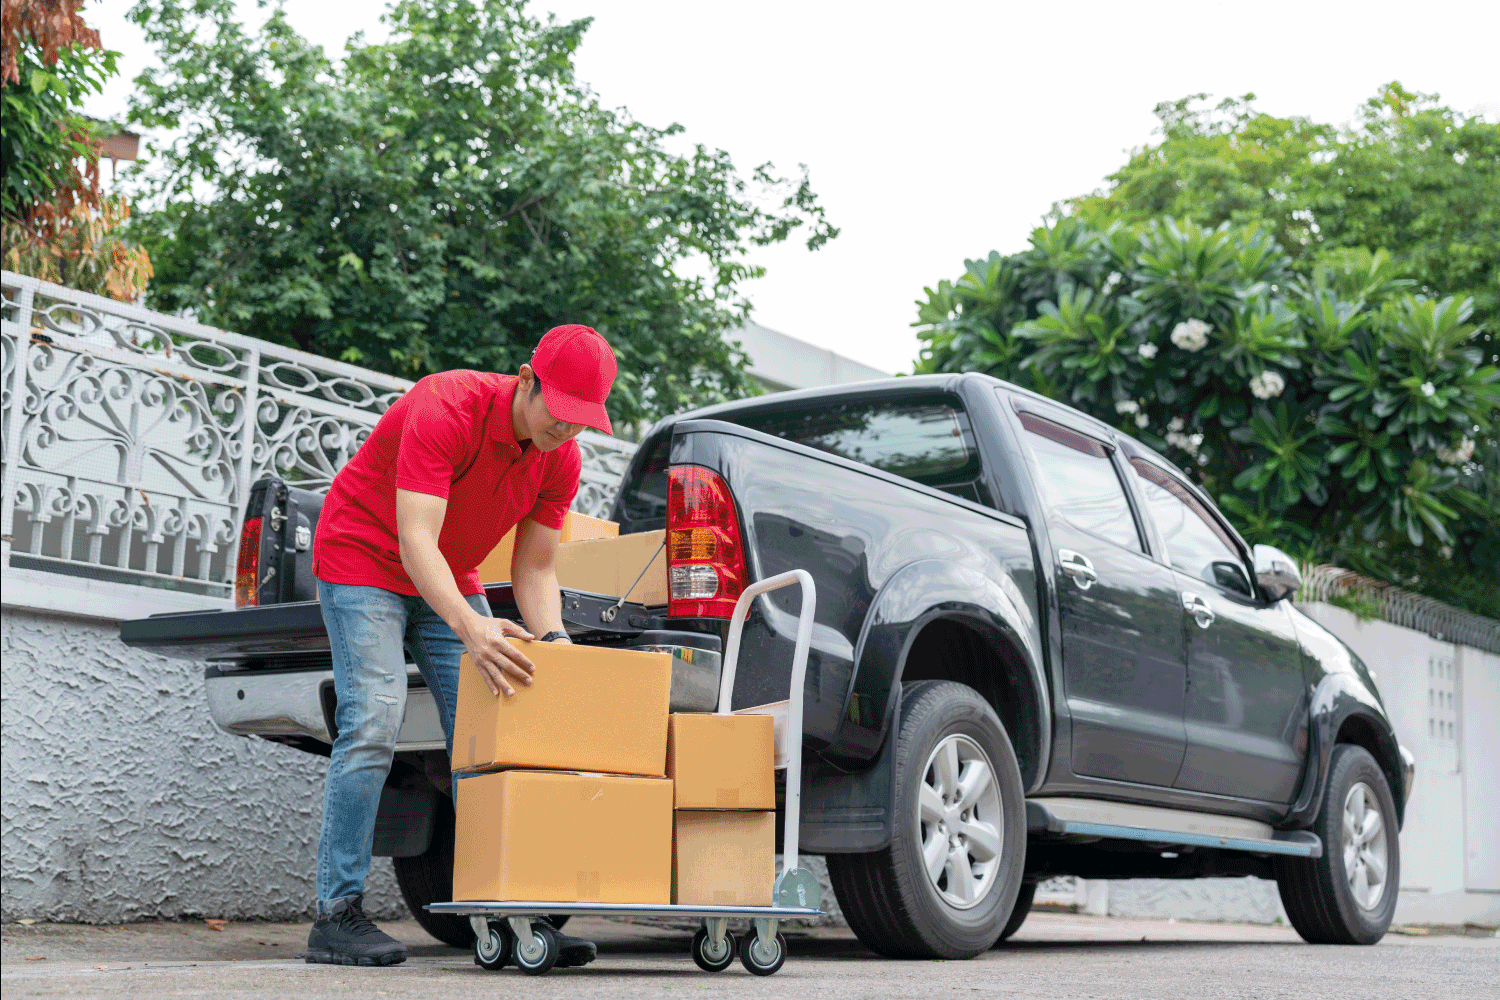 Delivery men in red uniform unloading cardboard boxes from pickup truck